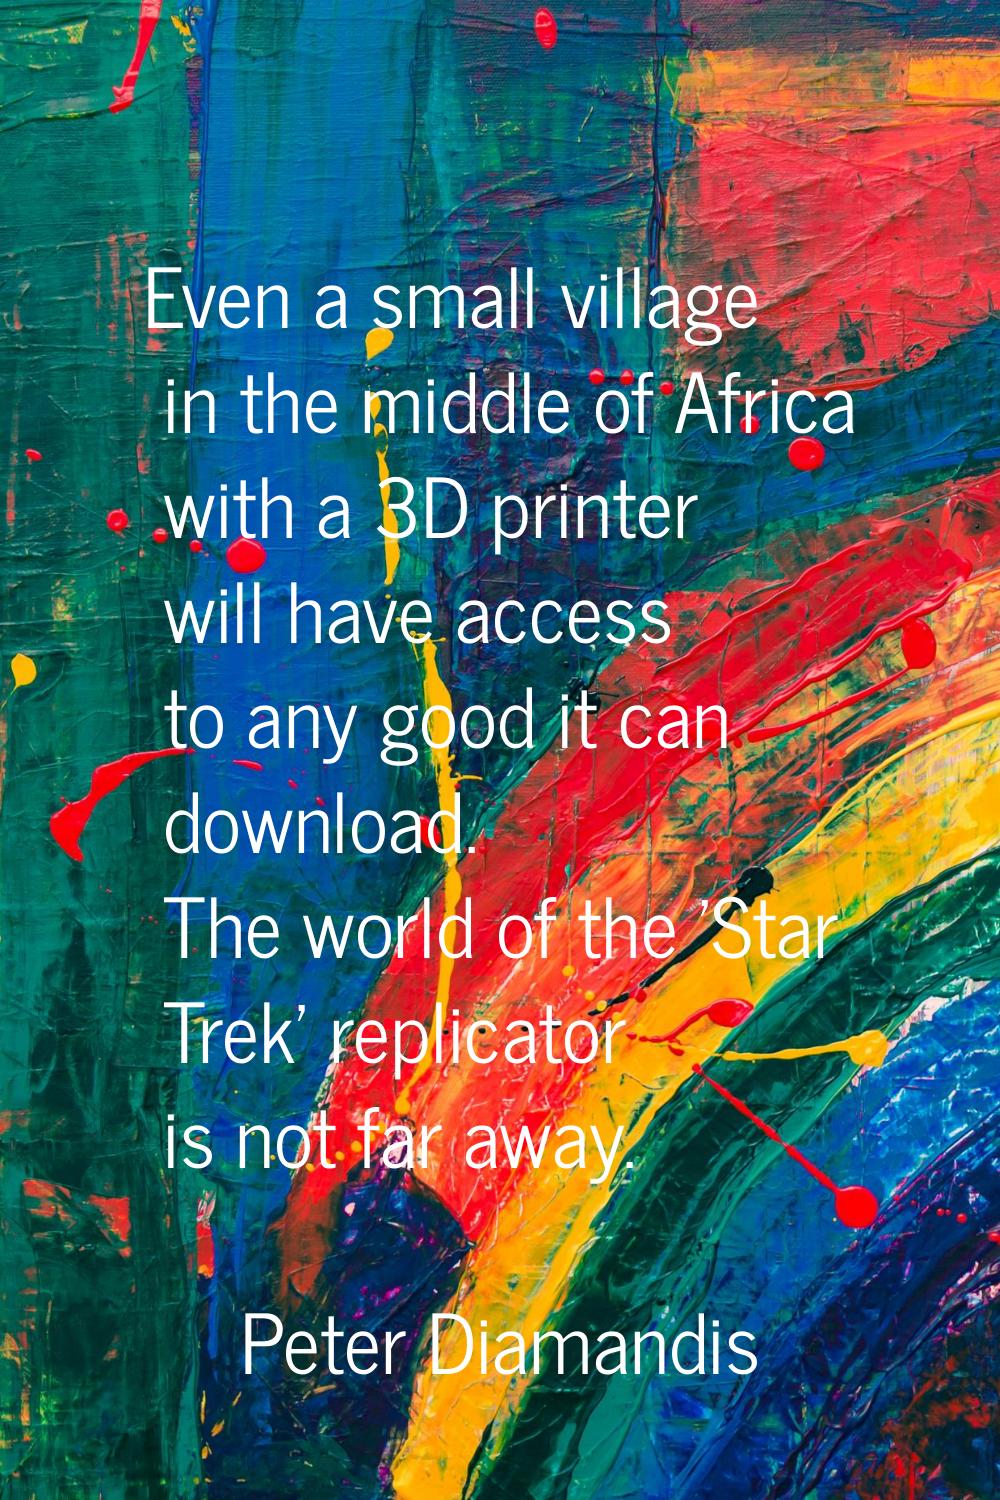 Even a small village in the middle of Africa with a 3D printer will have access to any good it can 